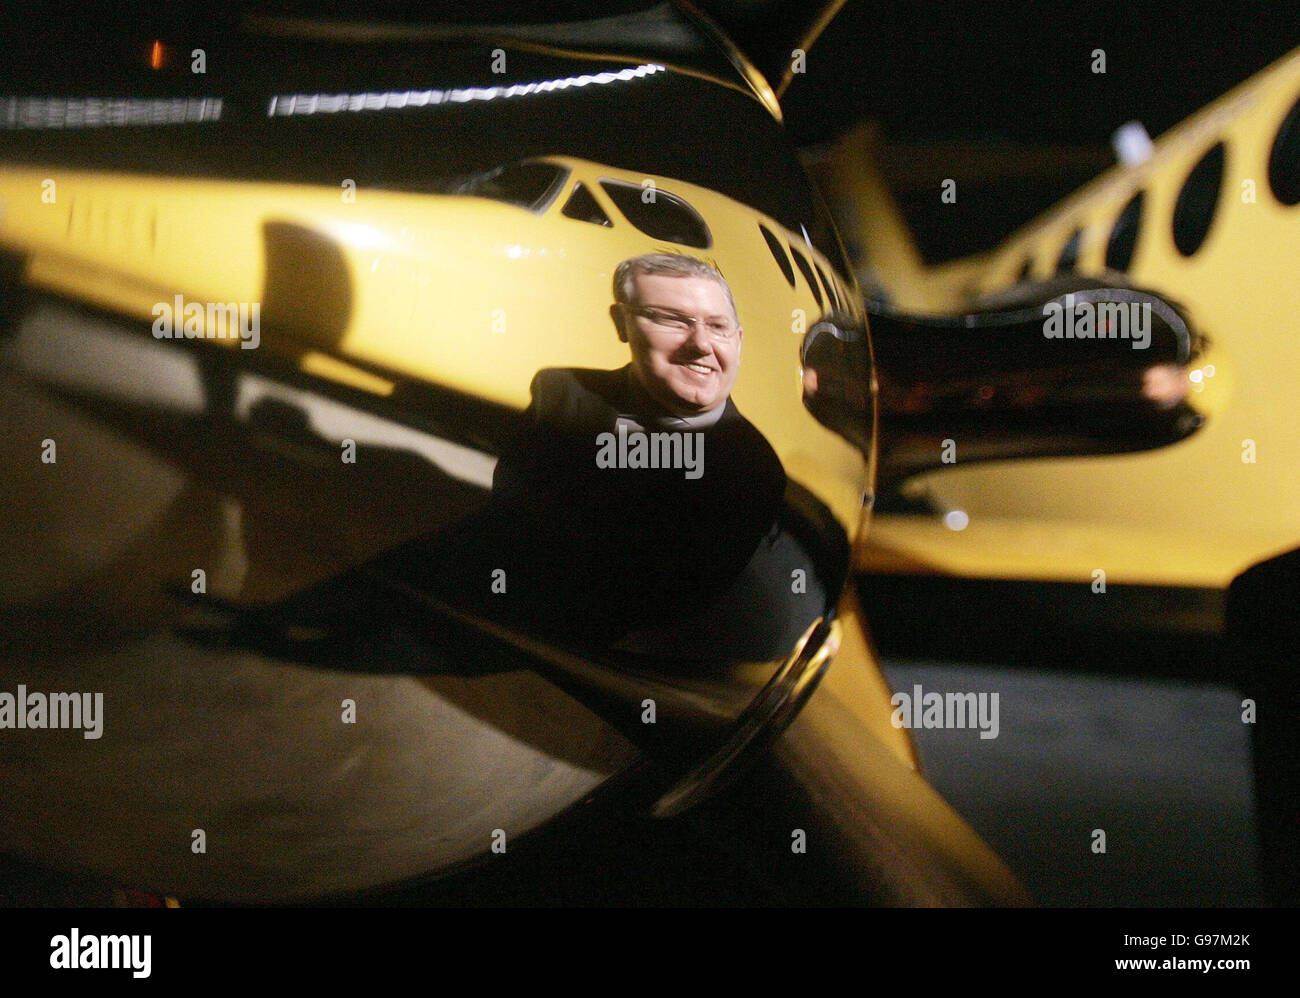 The image of Scottish Health Minister Andy Kerr is reflected in the propeller of one of two new purpose built King Air 200c aircraft at Edinburgh Airport, Monday March 20, 2006, that will form an integral part of a new world class air ambulance service for Scotland. With a range of nearly 1,700 miles, a top speed of 289 knots and space for two stretchers, they are due to start operating out of Glasgow and Aberdeen from April 1. See PA Story SCOTLAND Ambulance. PRESS ASSOCIATION Photo. Photo credit should read: Andrew Milligan/PA. Stock Photo